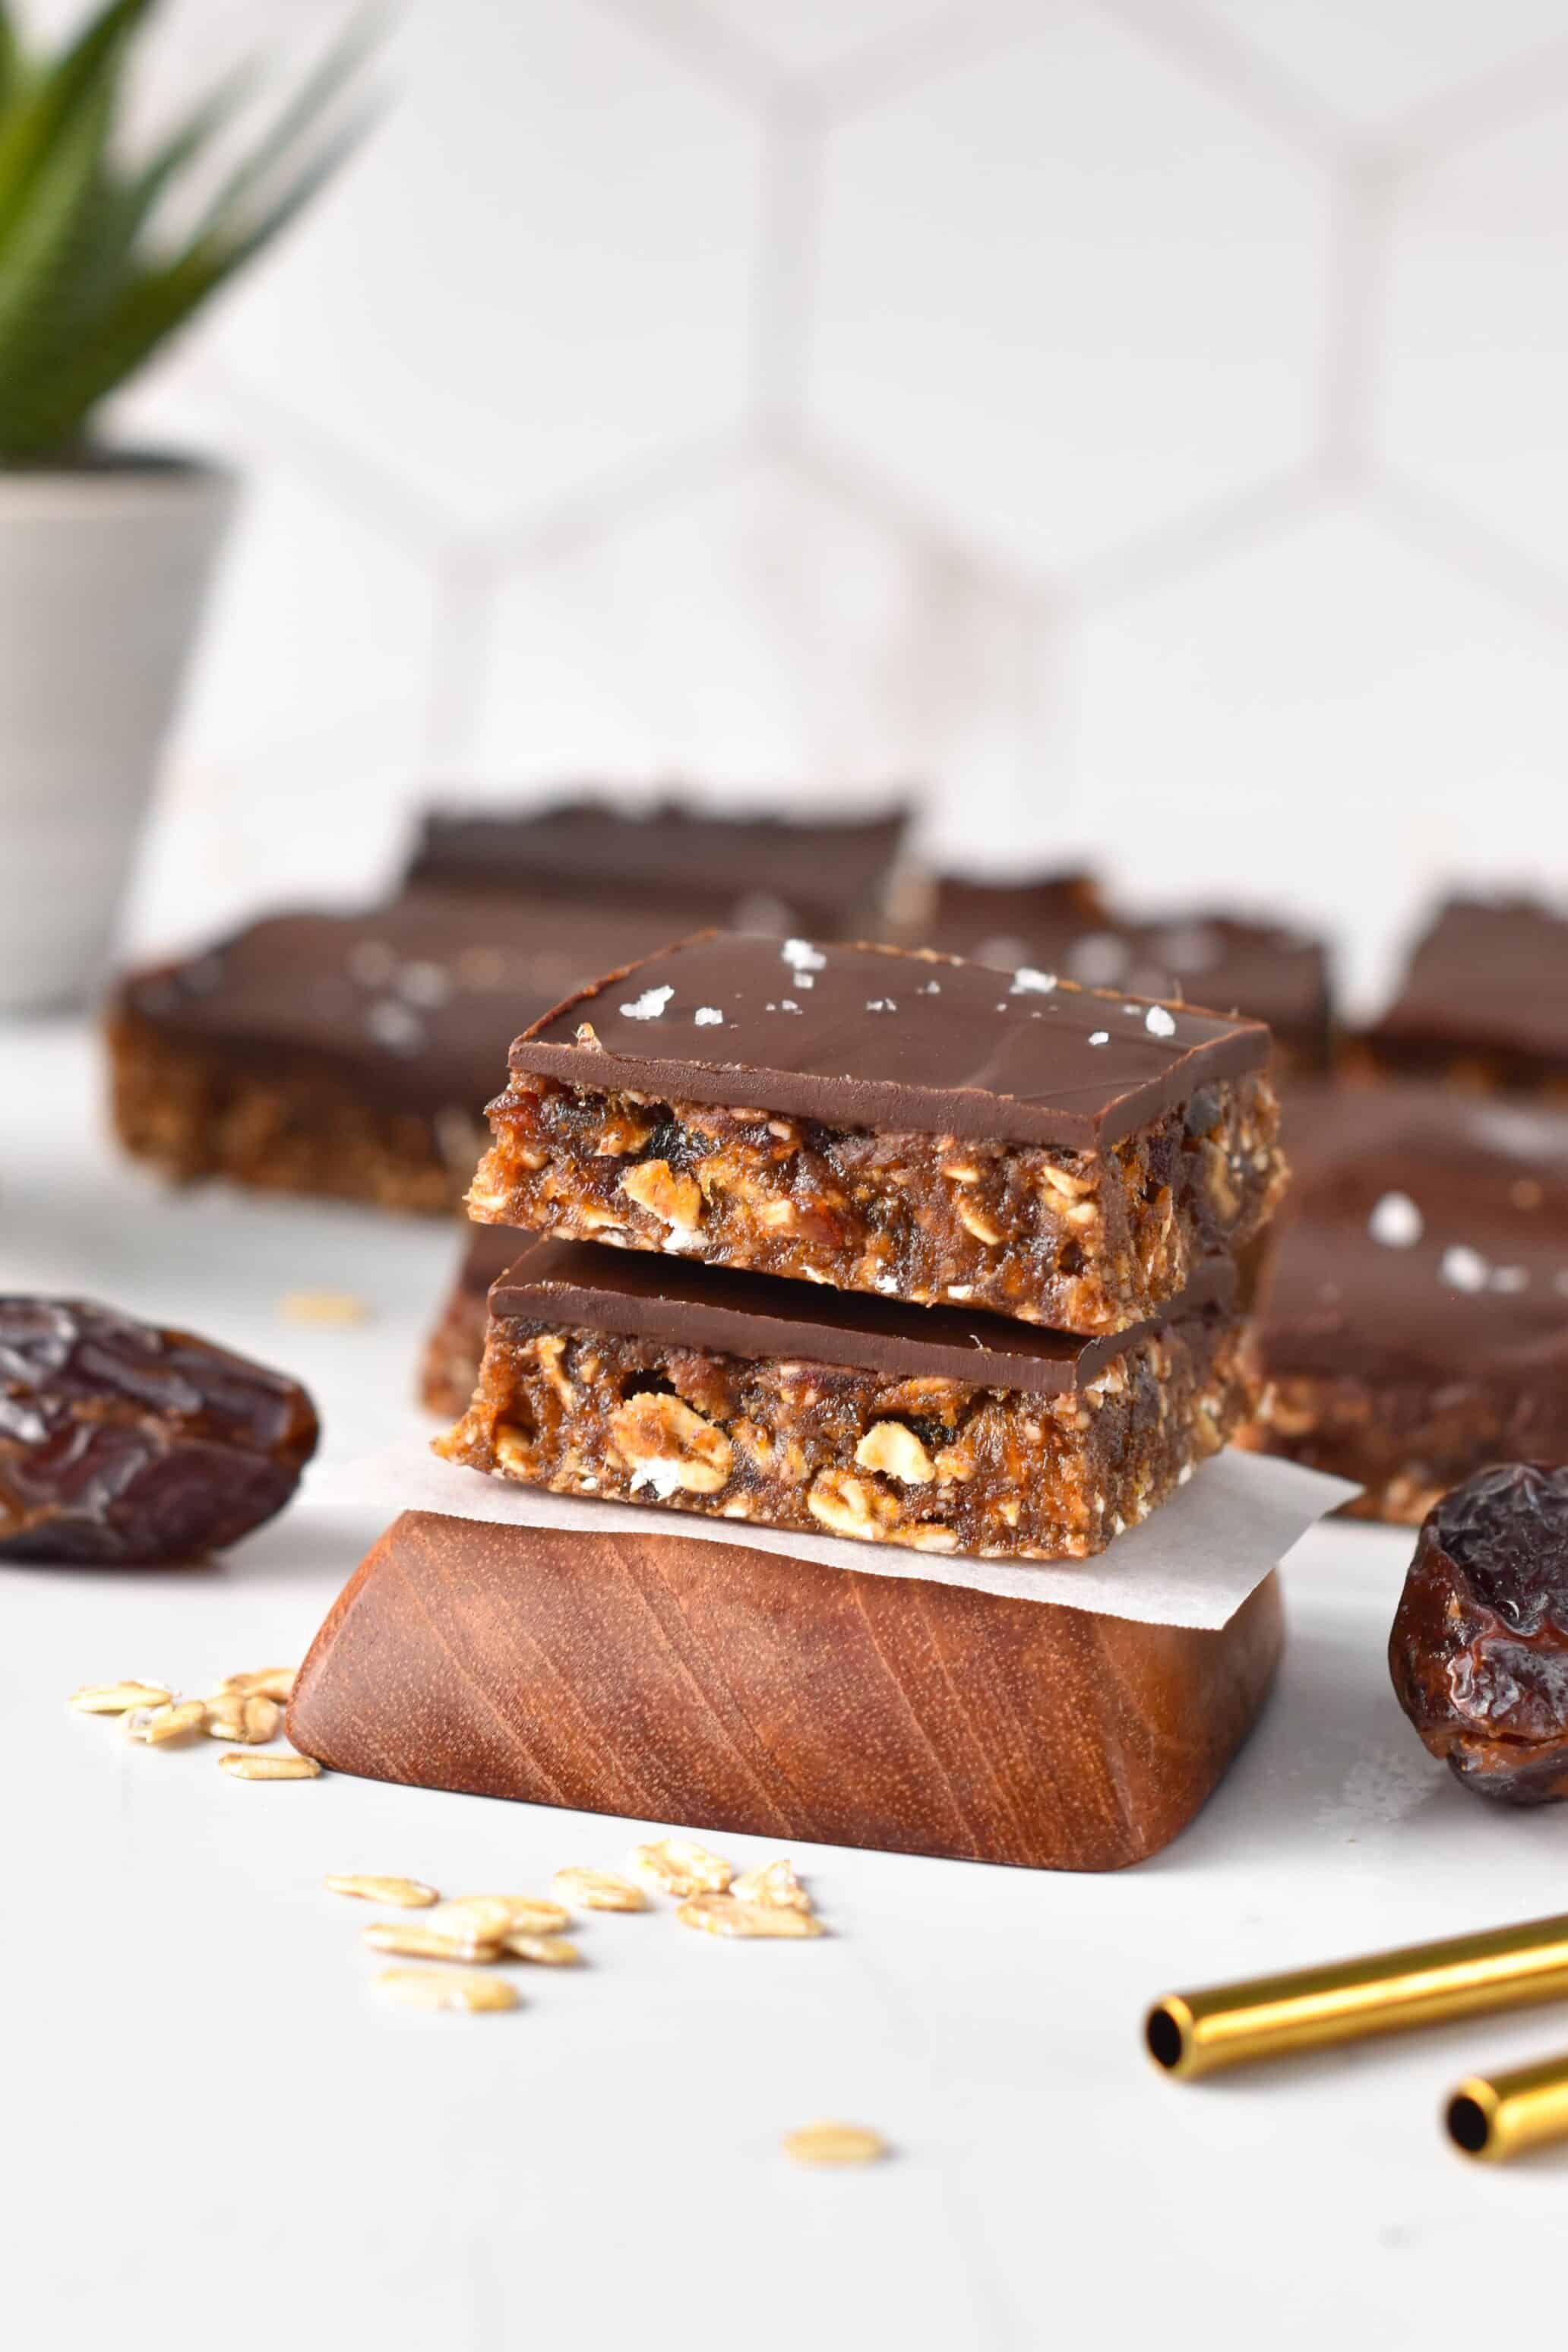 These healthy date bars are the most healthy sweet treat ever, packed with fiber, vitamins, and antioxidants